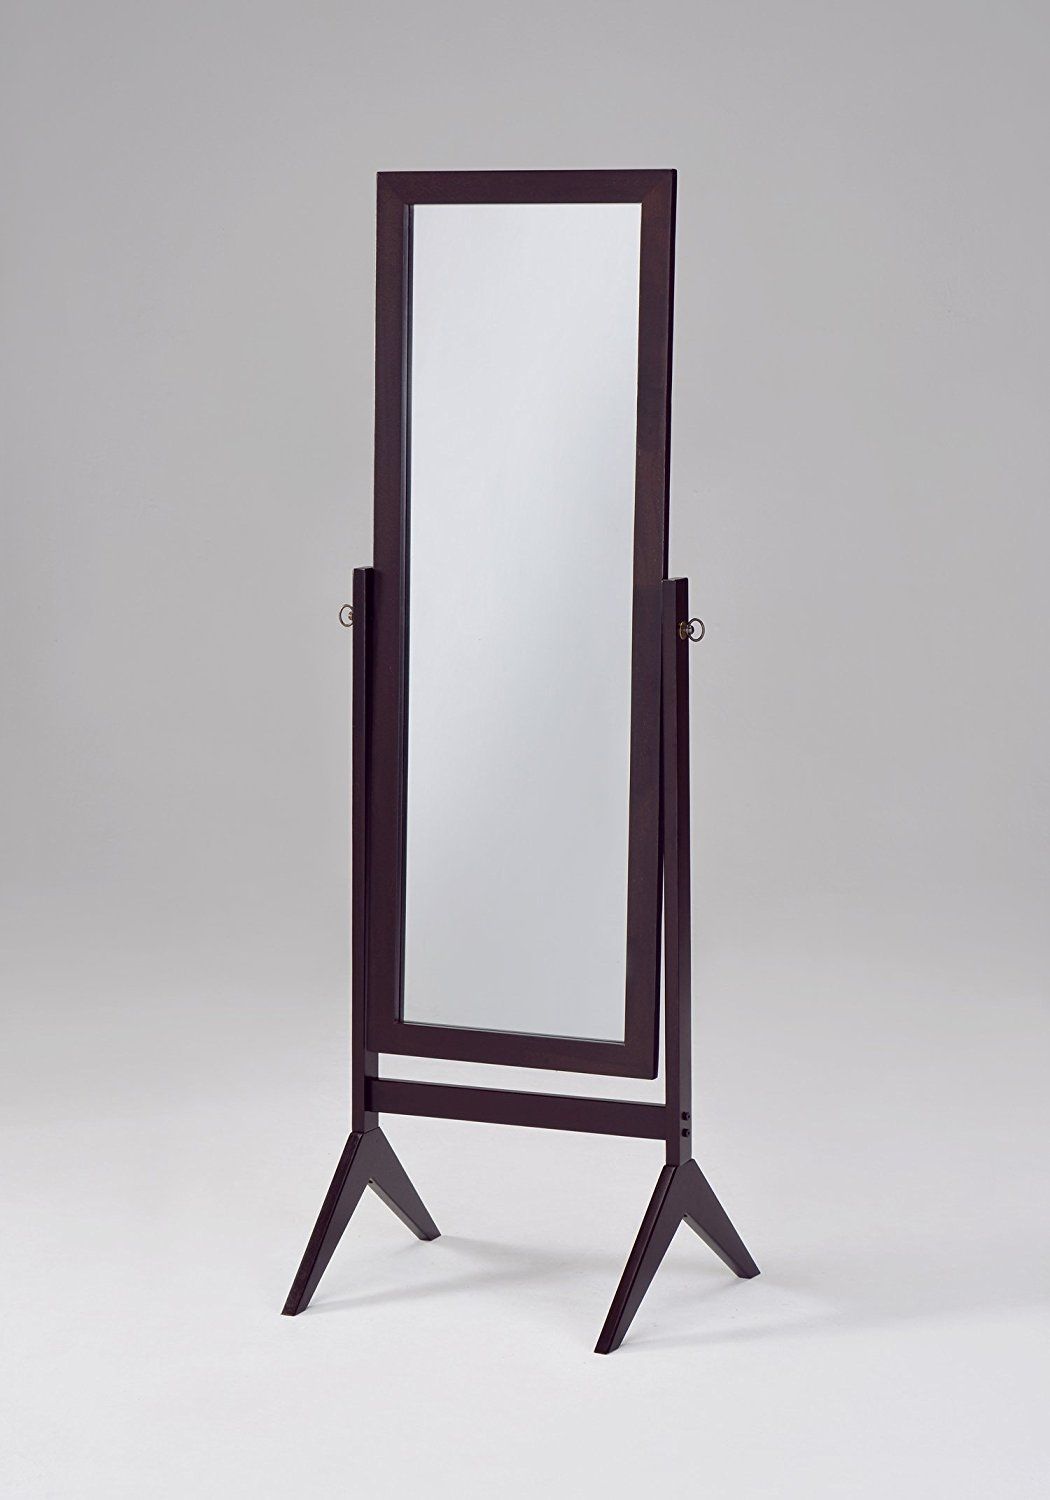 Shop Amazon Floor Mirrors Inside Wrought Iron Full Length Mirror (View 13 of 15)